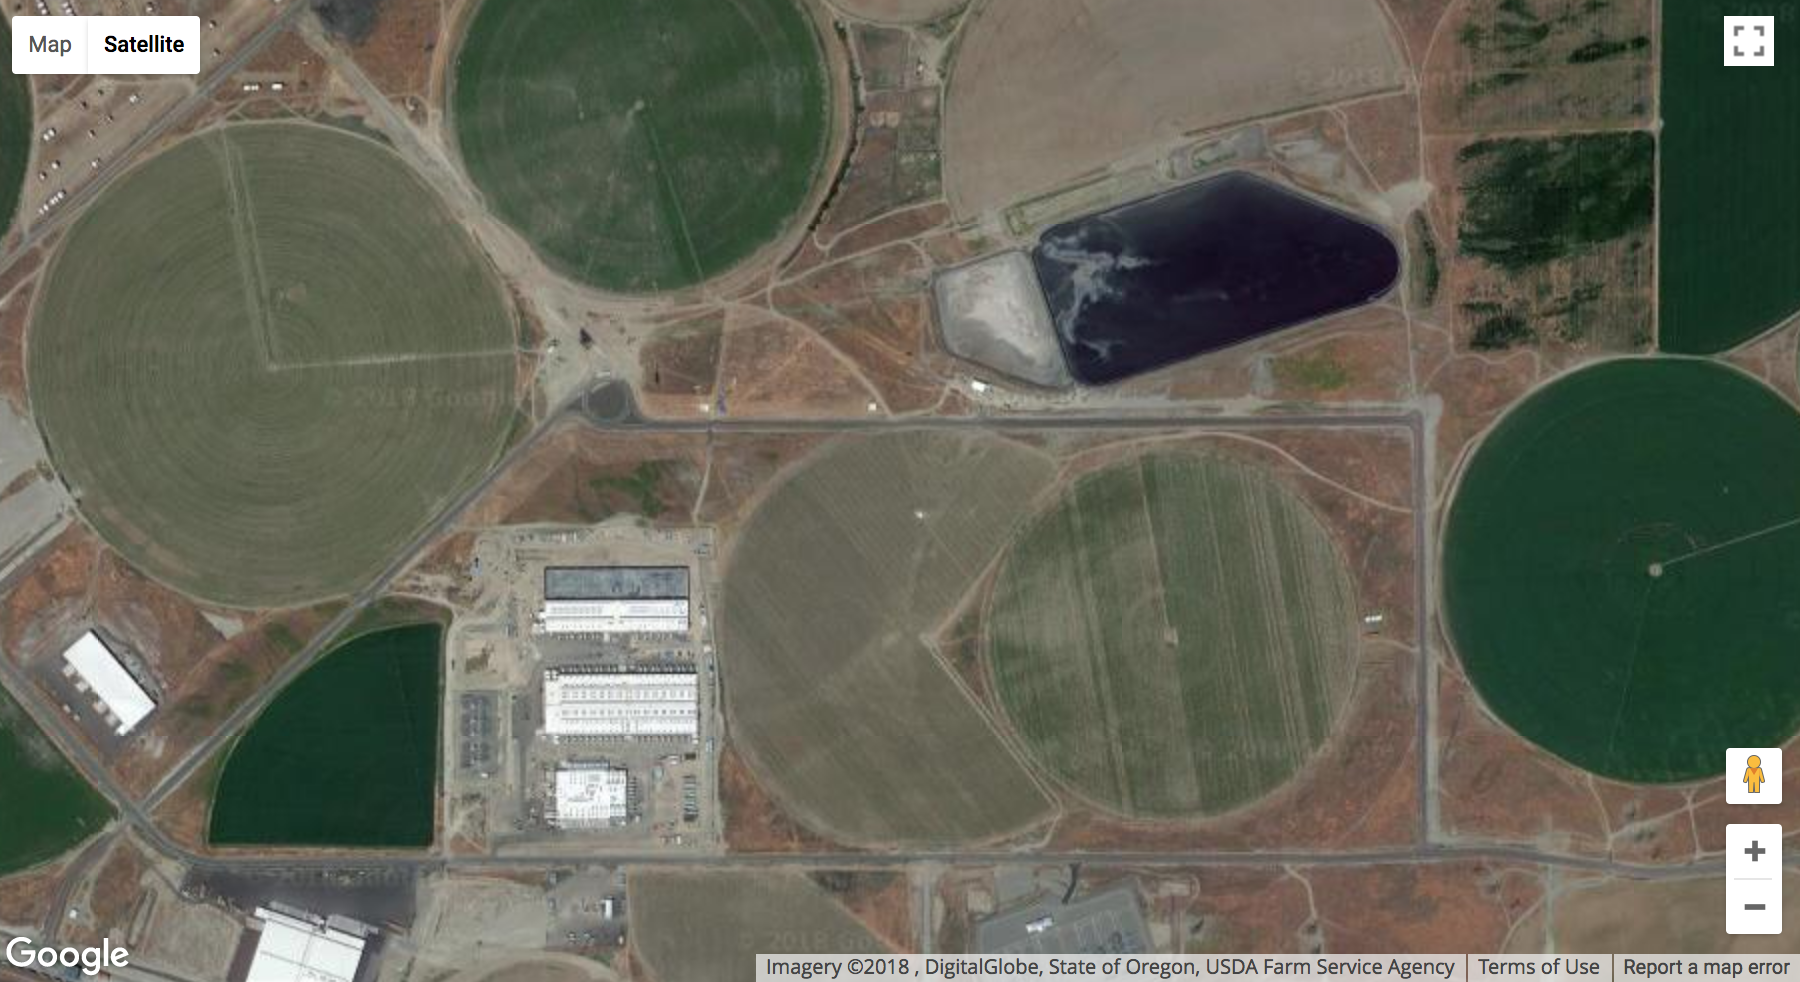 a Google Maps satellite shot of a low concrete building surrounded by agricultural fields